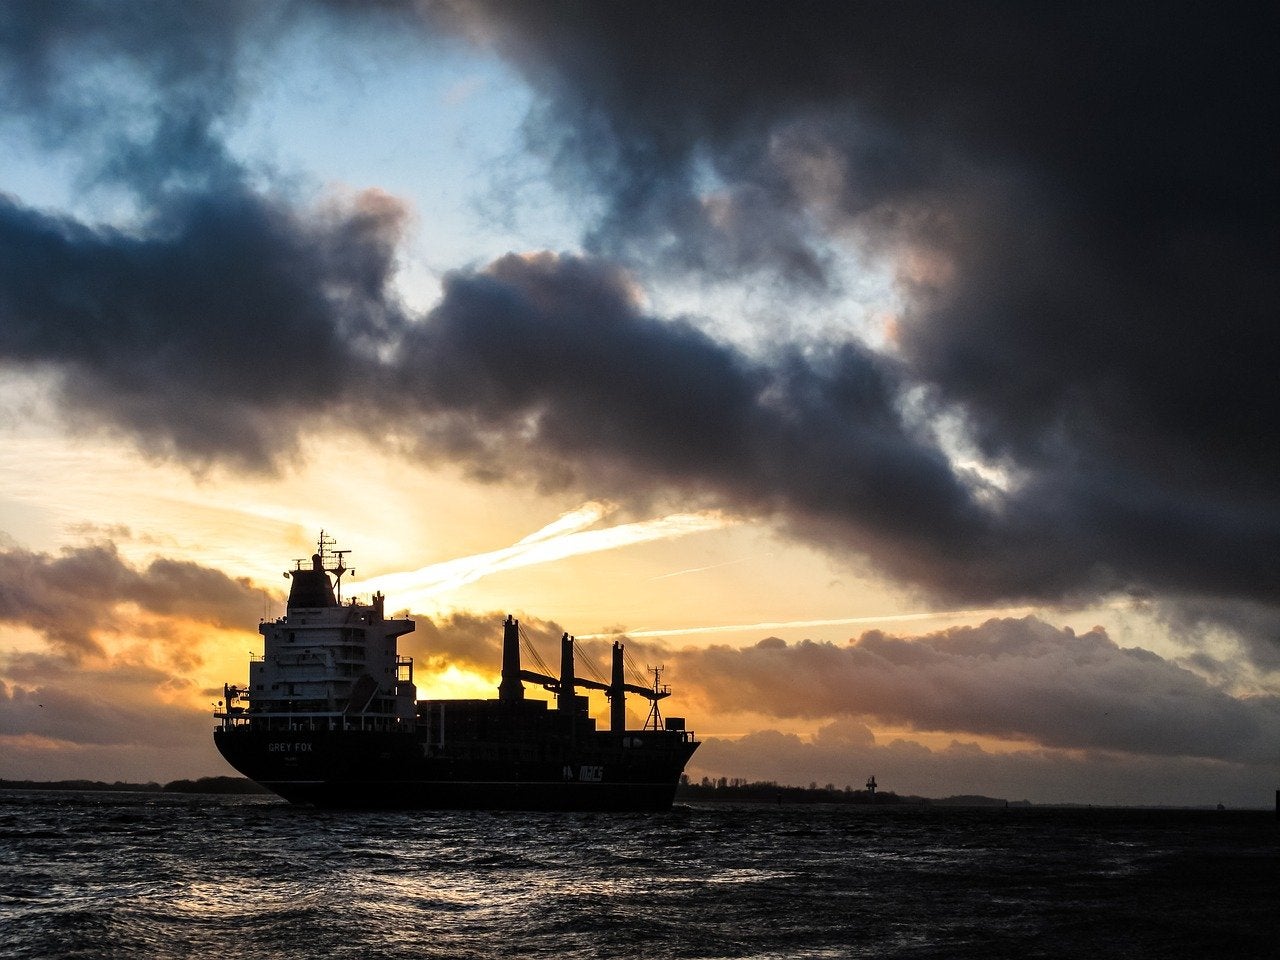 Windward partners with shipping firms for digital transformation